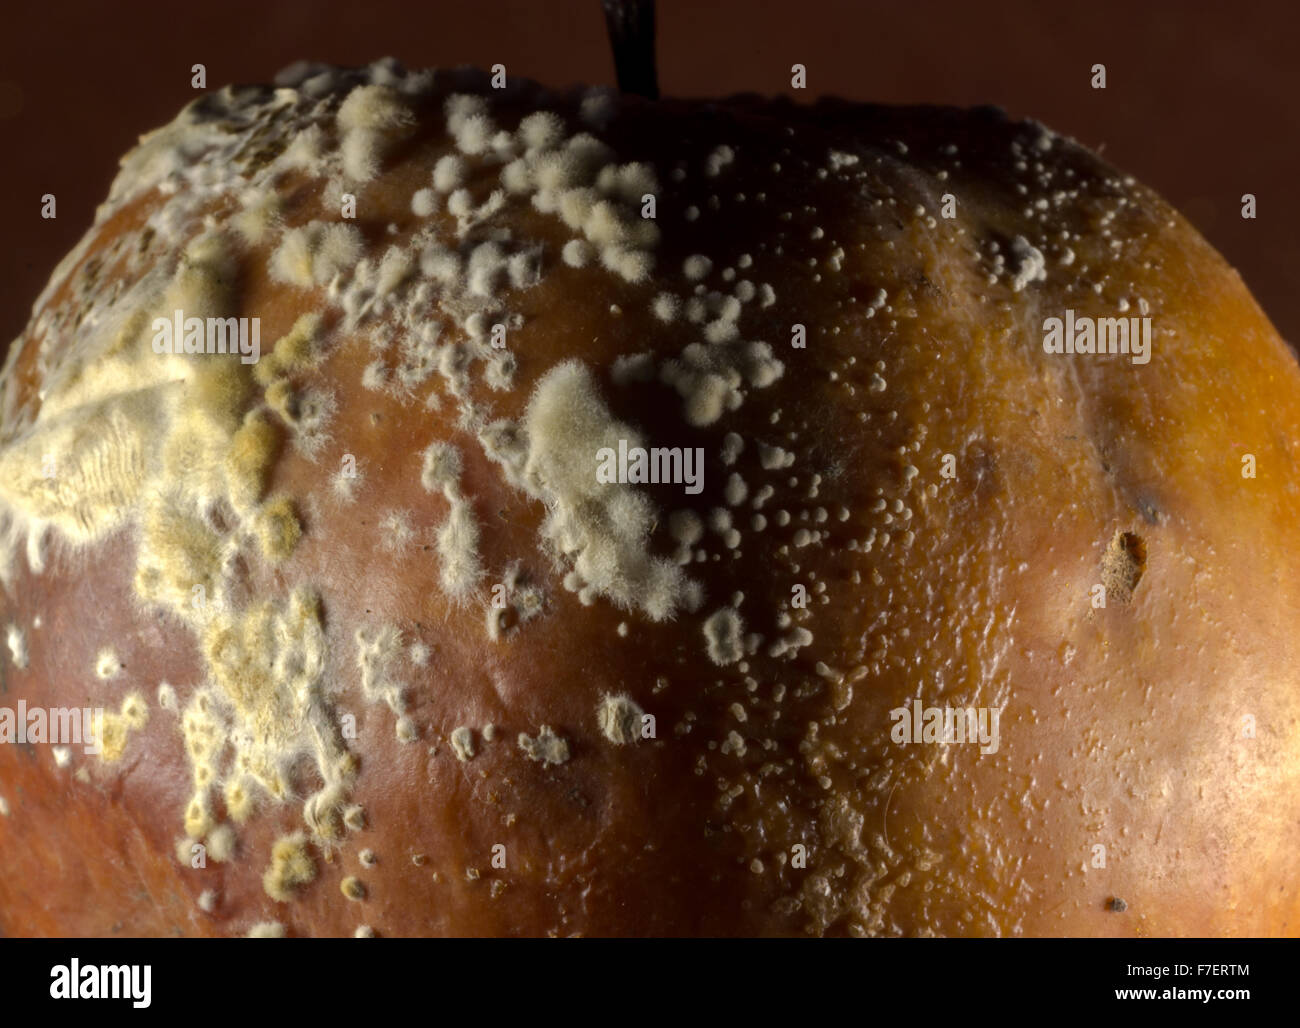 Colonies of Penicillium expansum growing on the skin of an old rotting apple, often called fruit-rot. Stock Photo